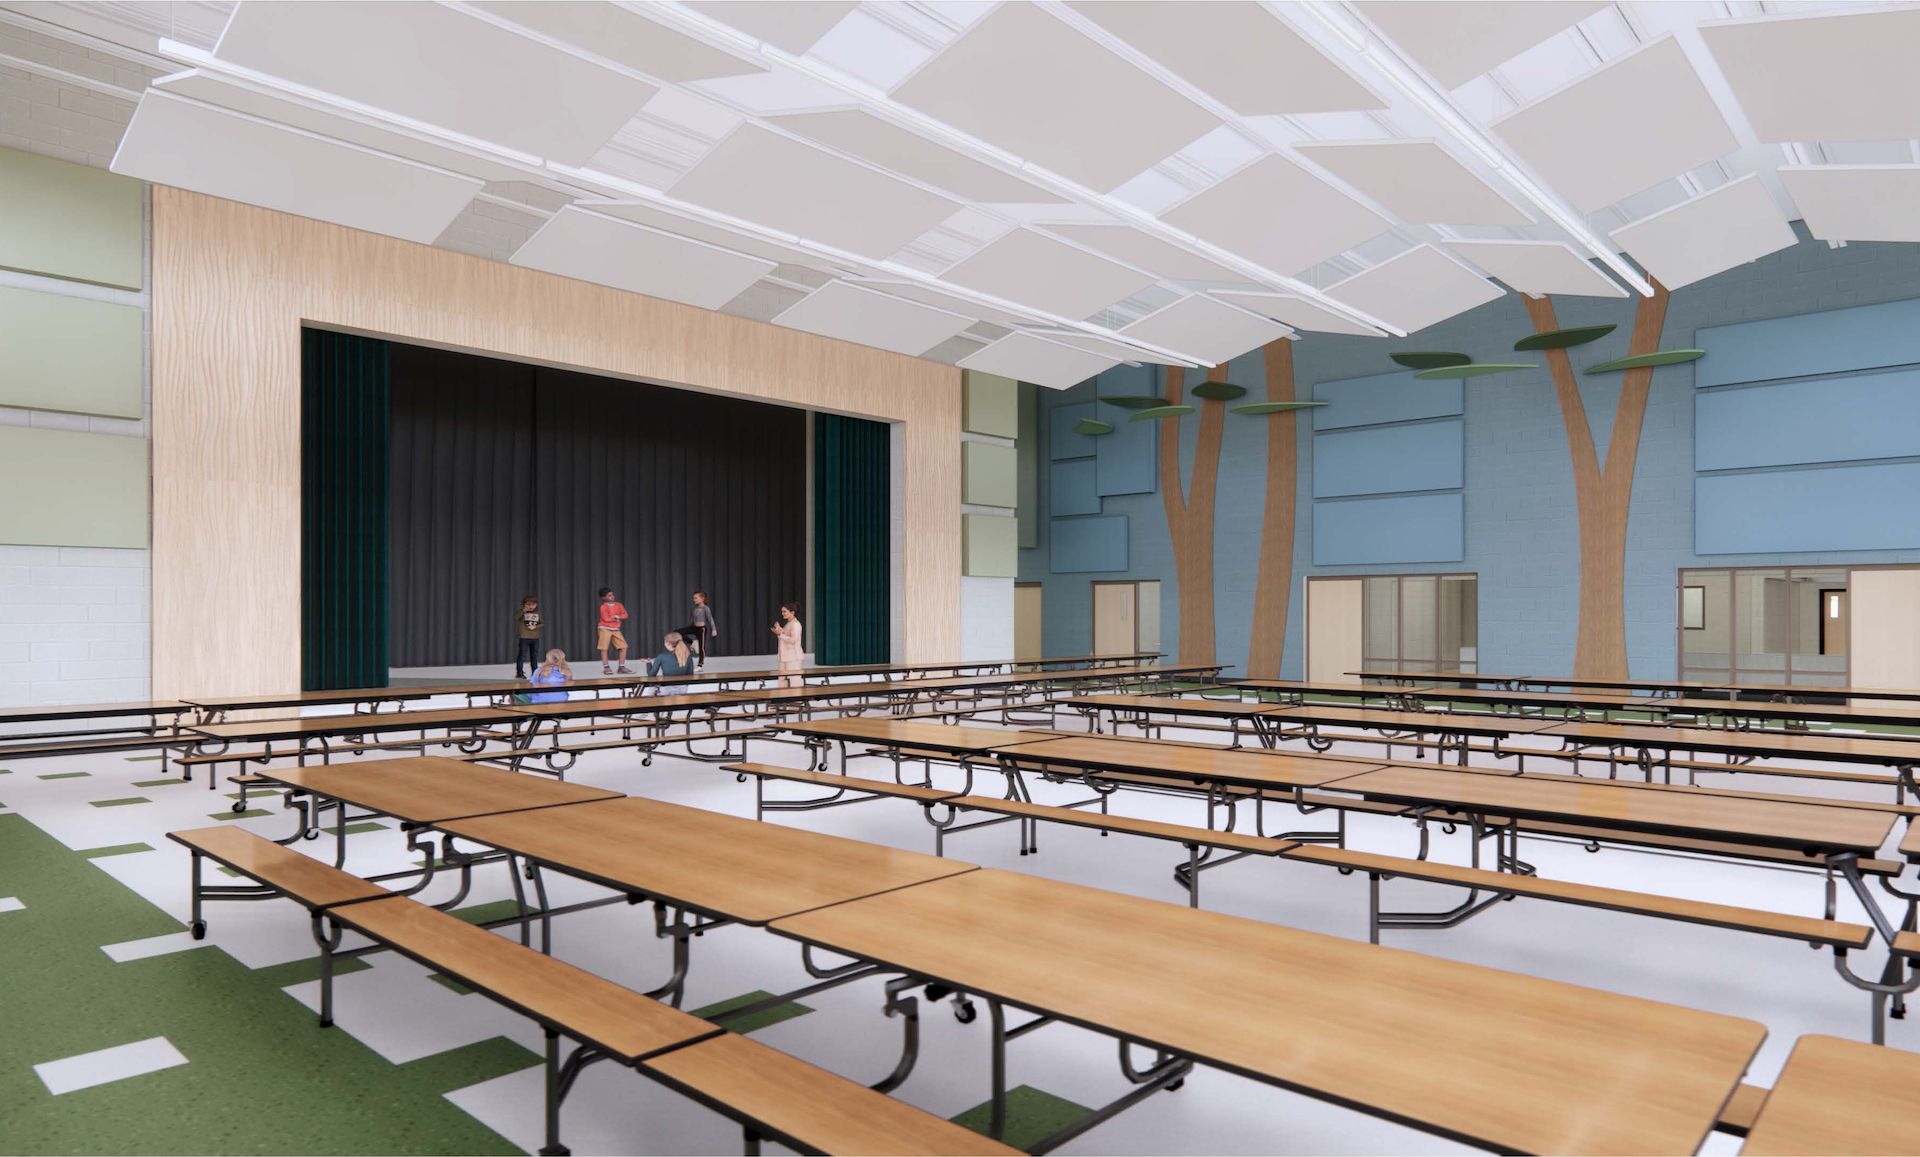 an artist 's impression of a school cafeteria with tables and benches and a stage .